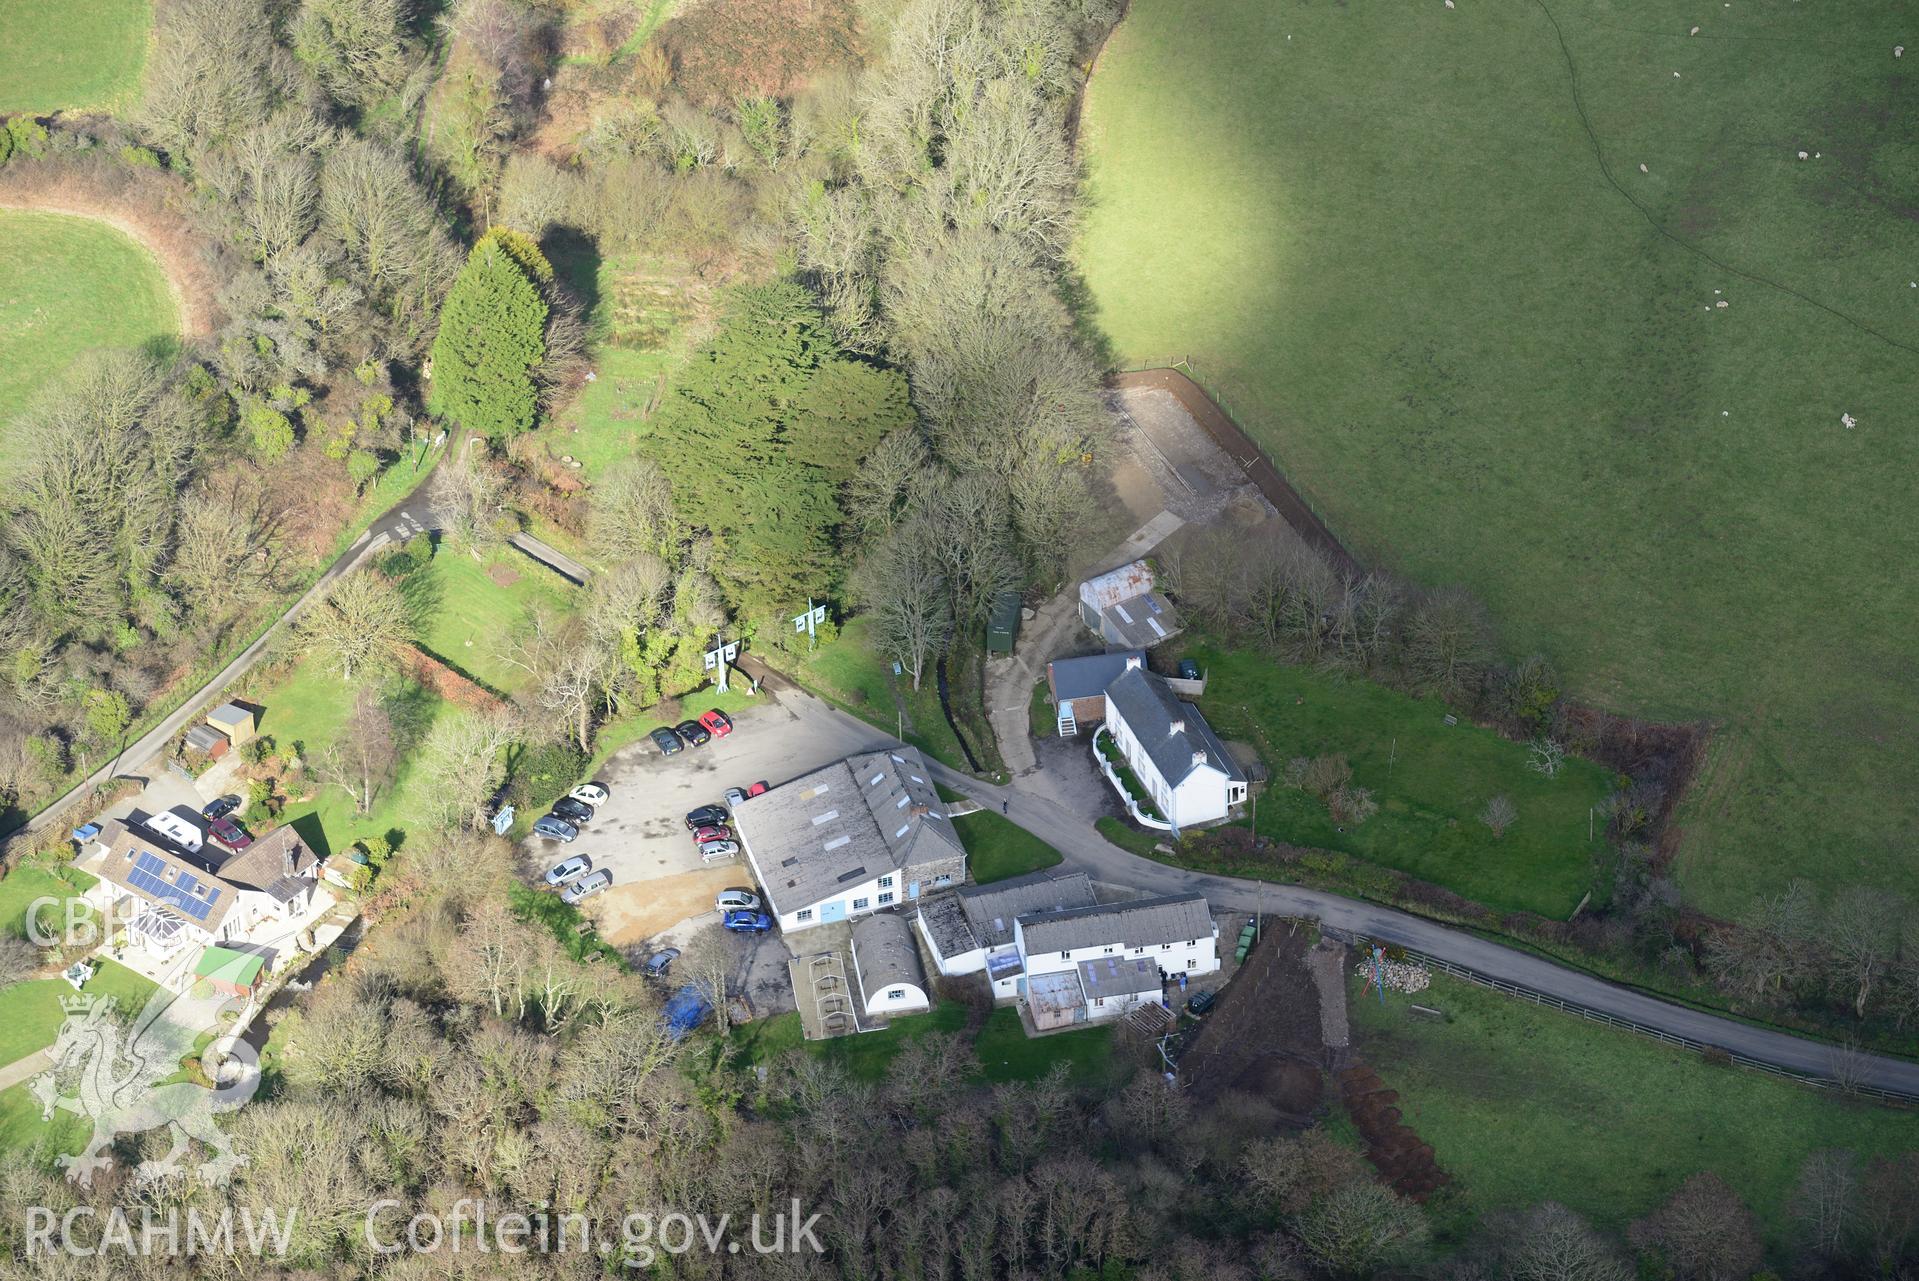 Melin Tregwynt woollen mill and Tre-Gwynt garden, Tremarchog, near Fishguard. Oblique aerial photograph taken during the Royal Commission's programme of archaeological aerial reconnaissance by Toby Driver on 13th March 2015.